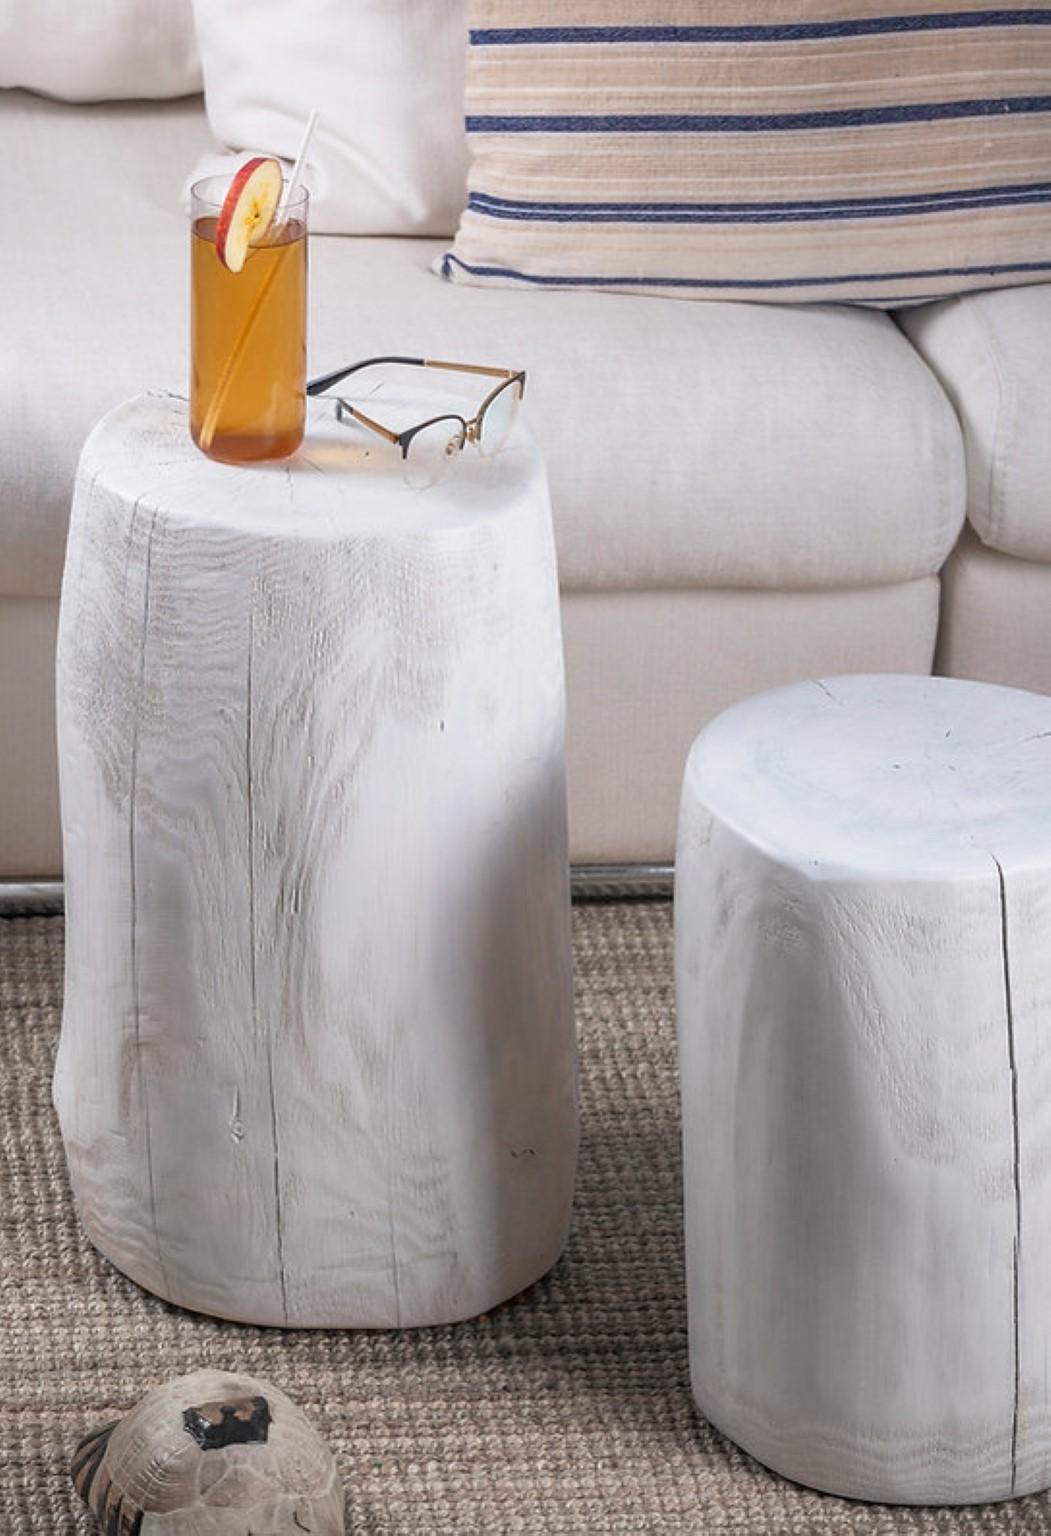 Set of 2 White Kabuk coffee table by Rectangle Studio
Dimensions: 
27 x H 49 cm 
27 x H 38 cm
Materials: Massive pinewood and natural wood oil

Kabuk is an alternative product with sculptural appearance which can be used as a coffee table and